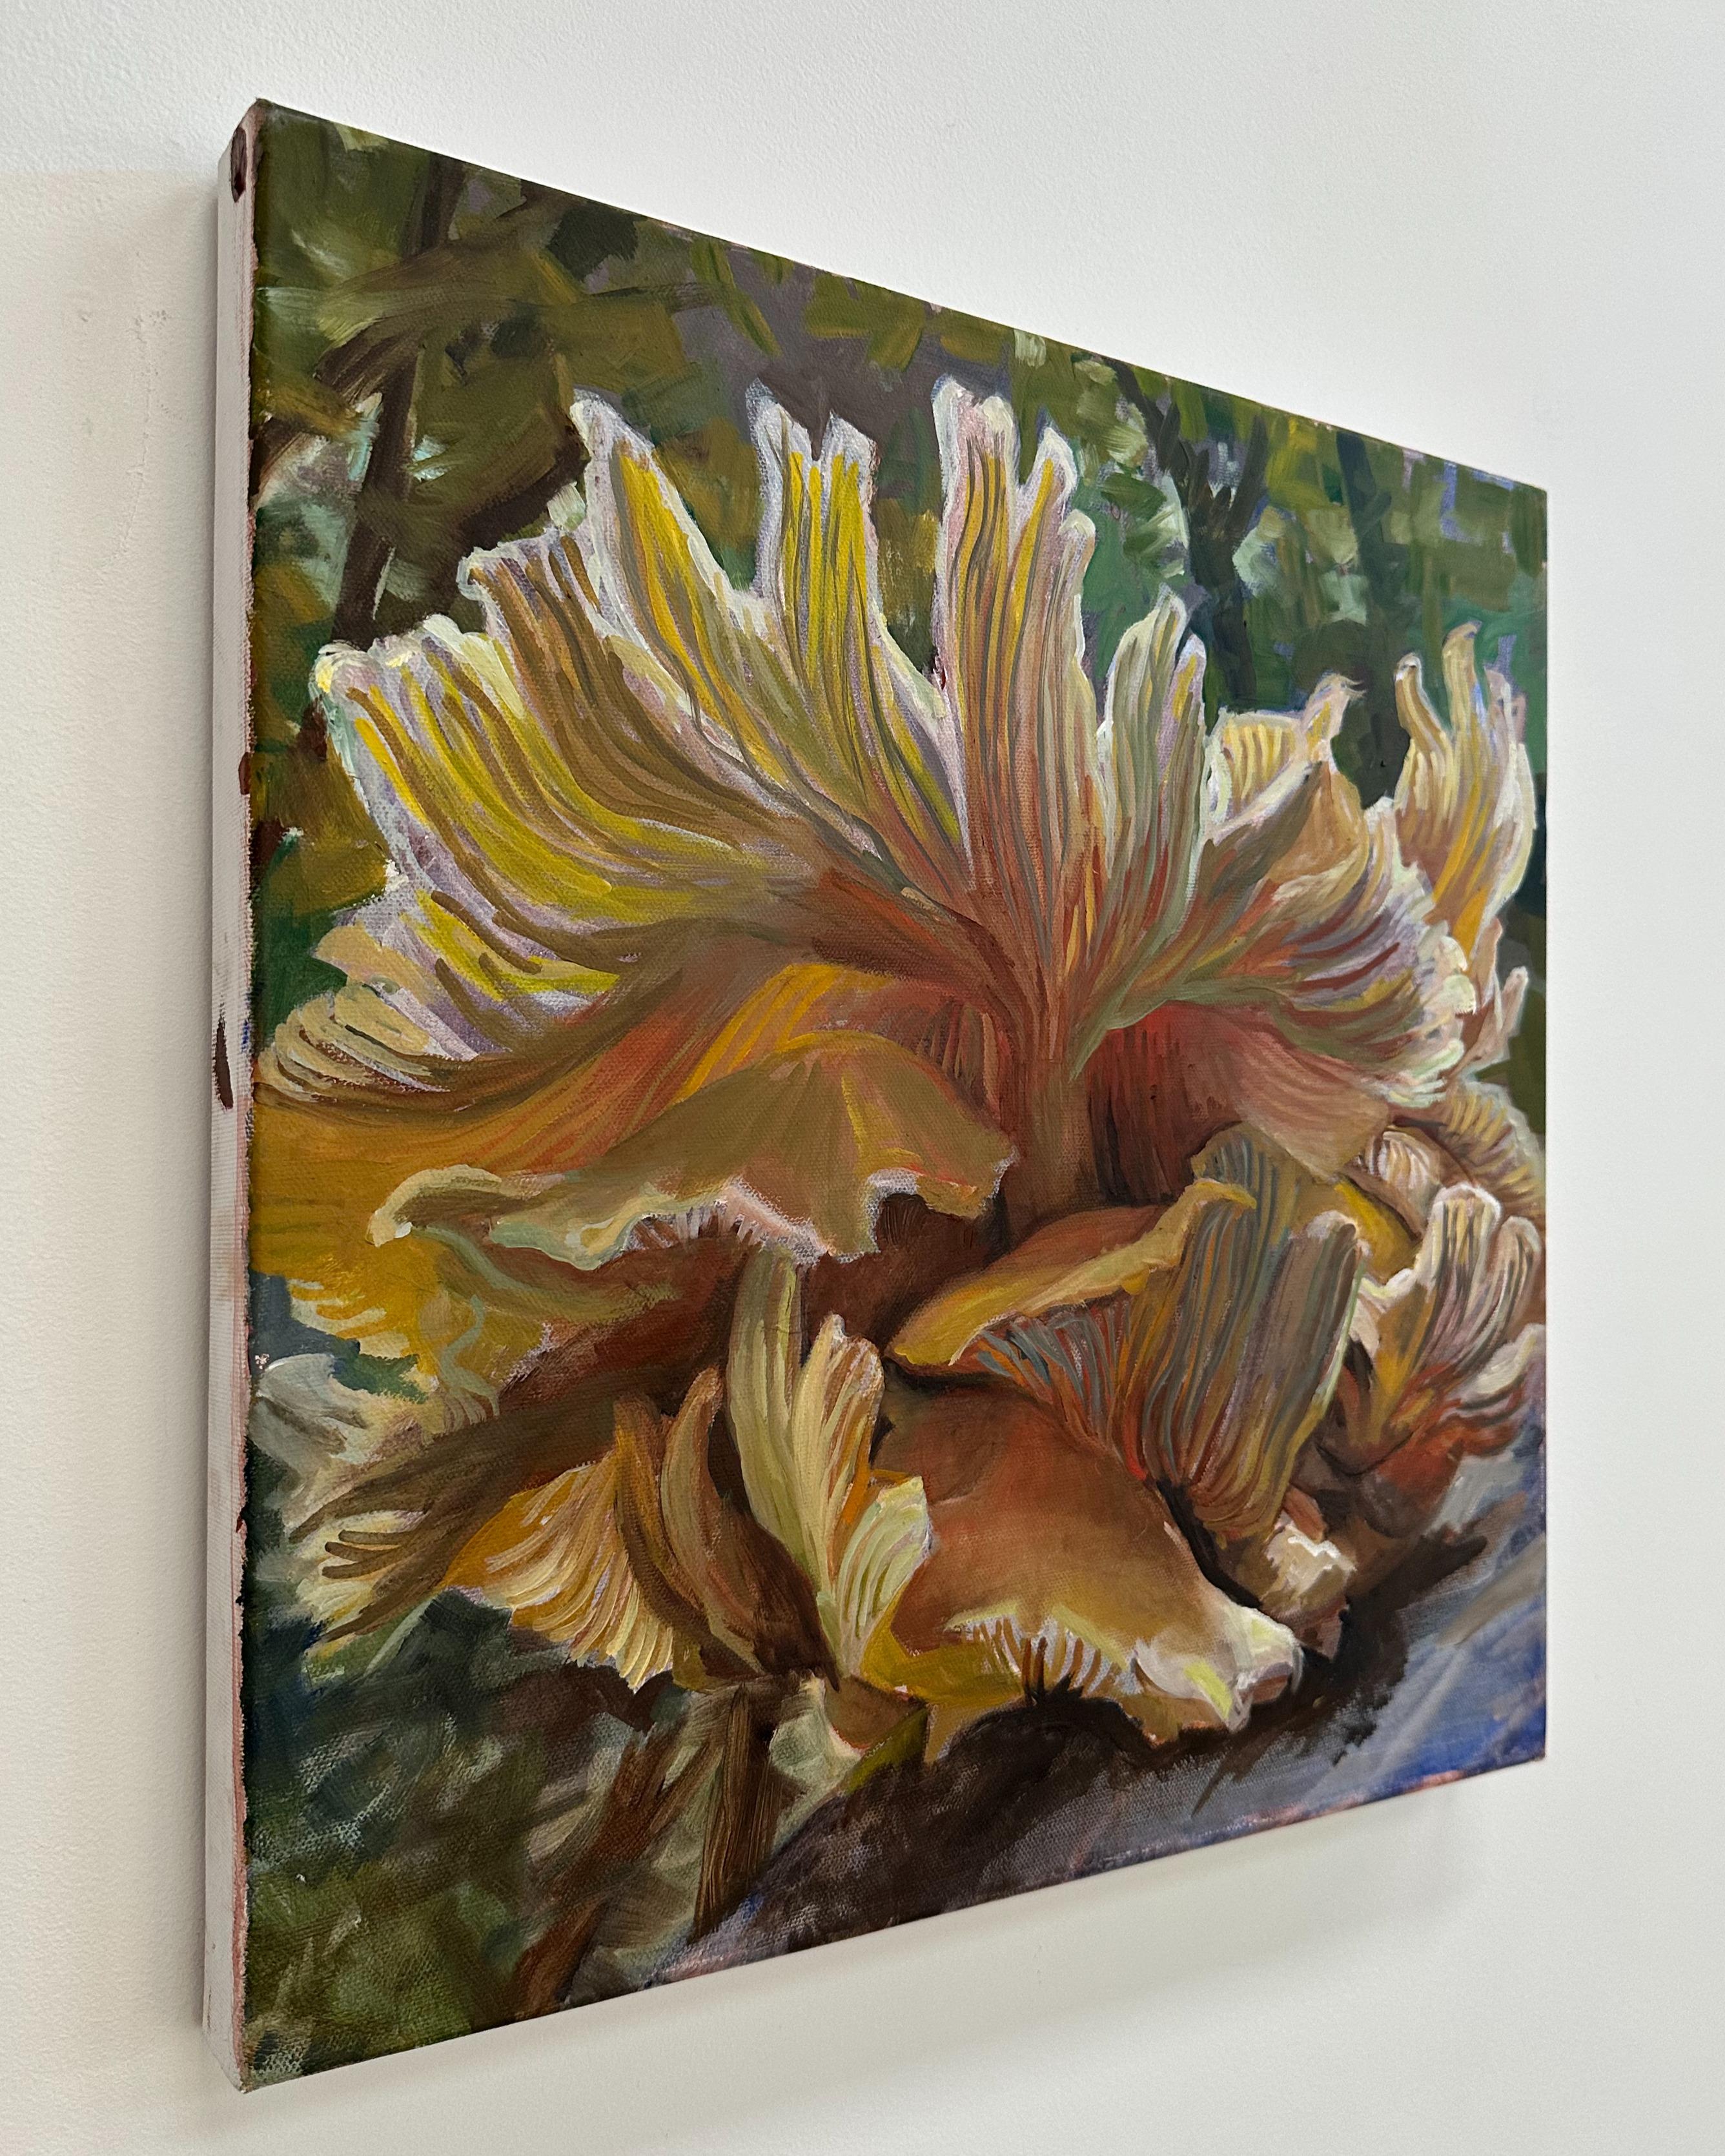 Study for Golden Oysters One, Mushroom Still Life, Yellow, Peach, Moss Green - Contemporary Painting by Andrea Kantrowitz